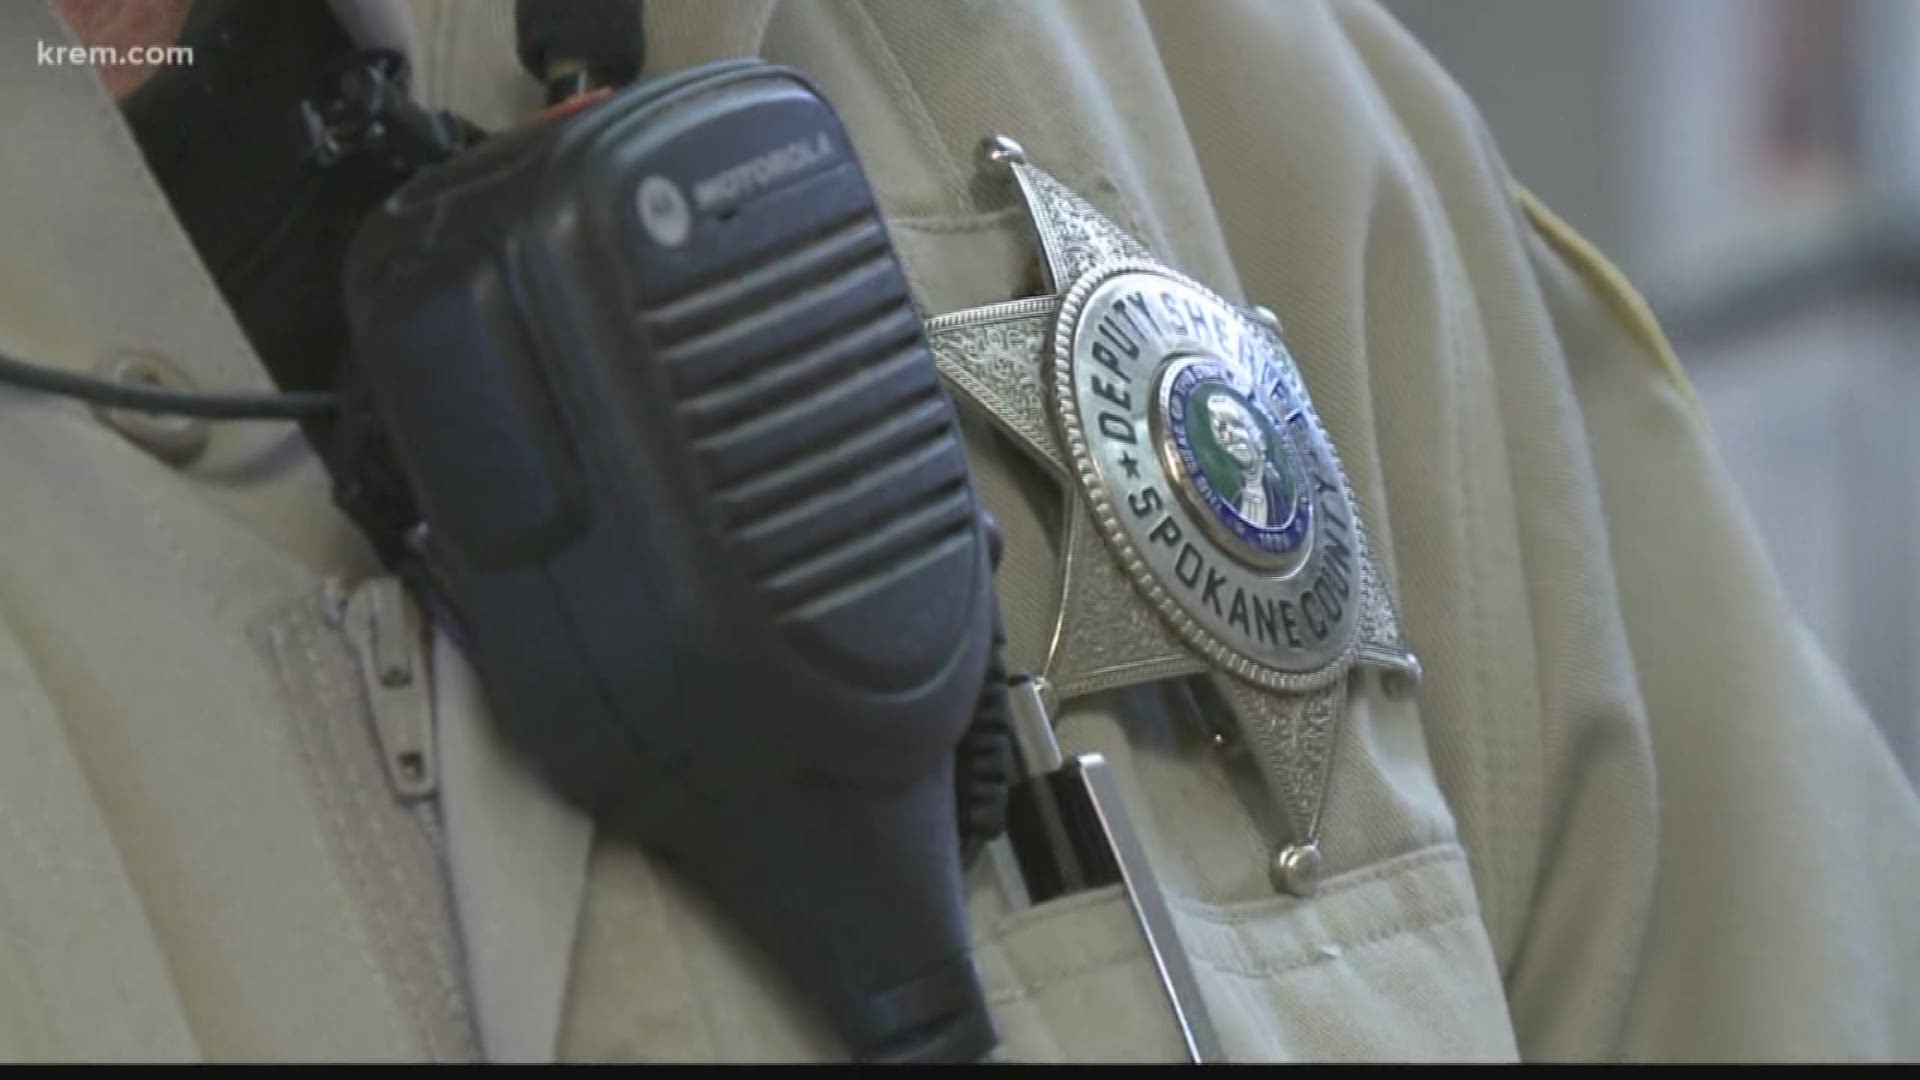 KREM 2's Mark Hanrahan breaks down the numbers of how much local schools pay resource officers.